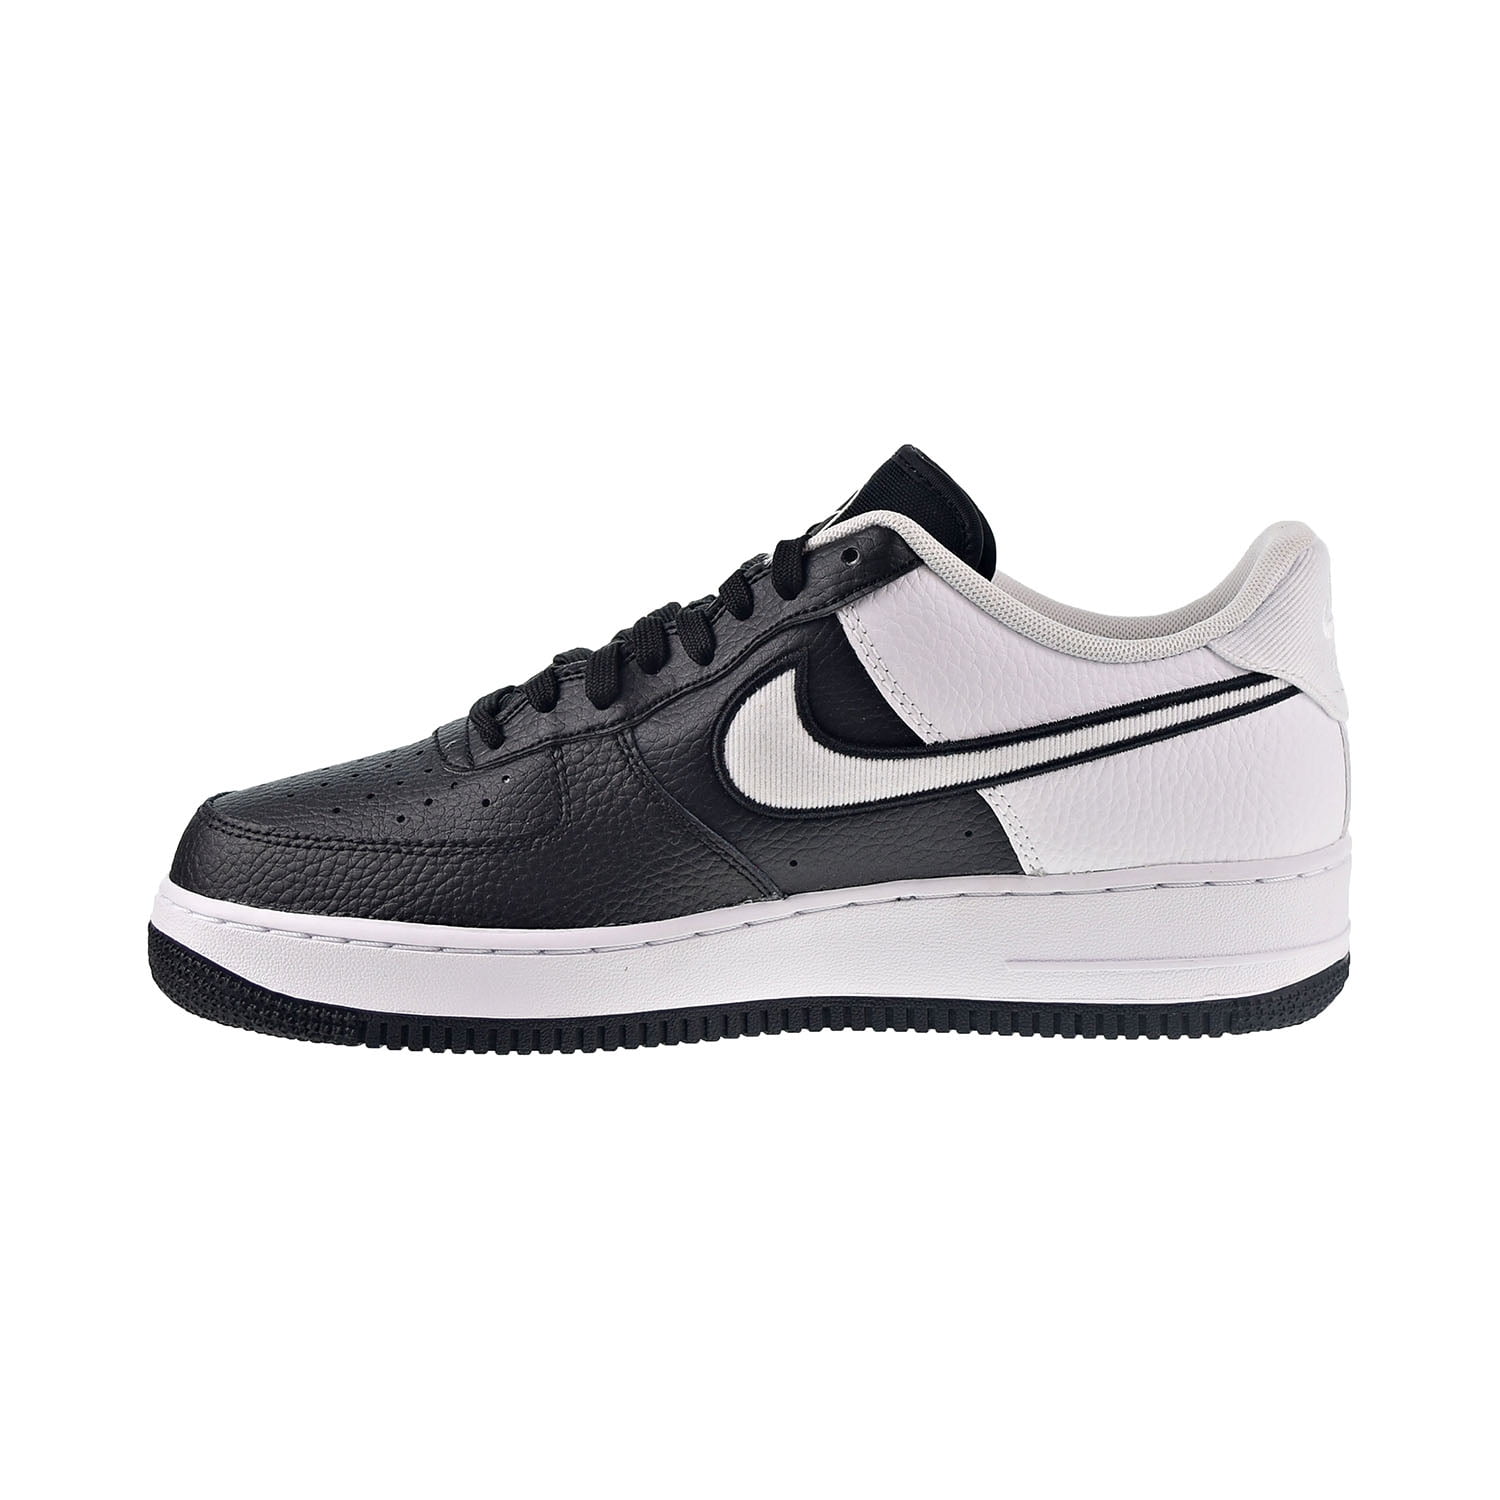 Nike Air Force 1 Low '07 LV8 Black/White AO2439-001 - SoleSnk